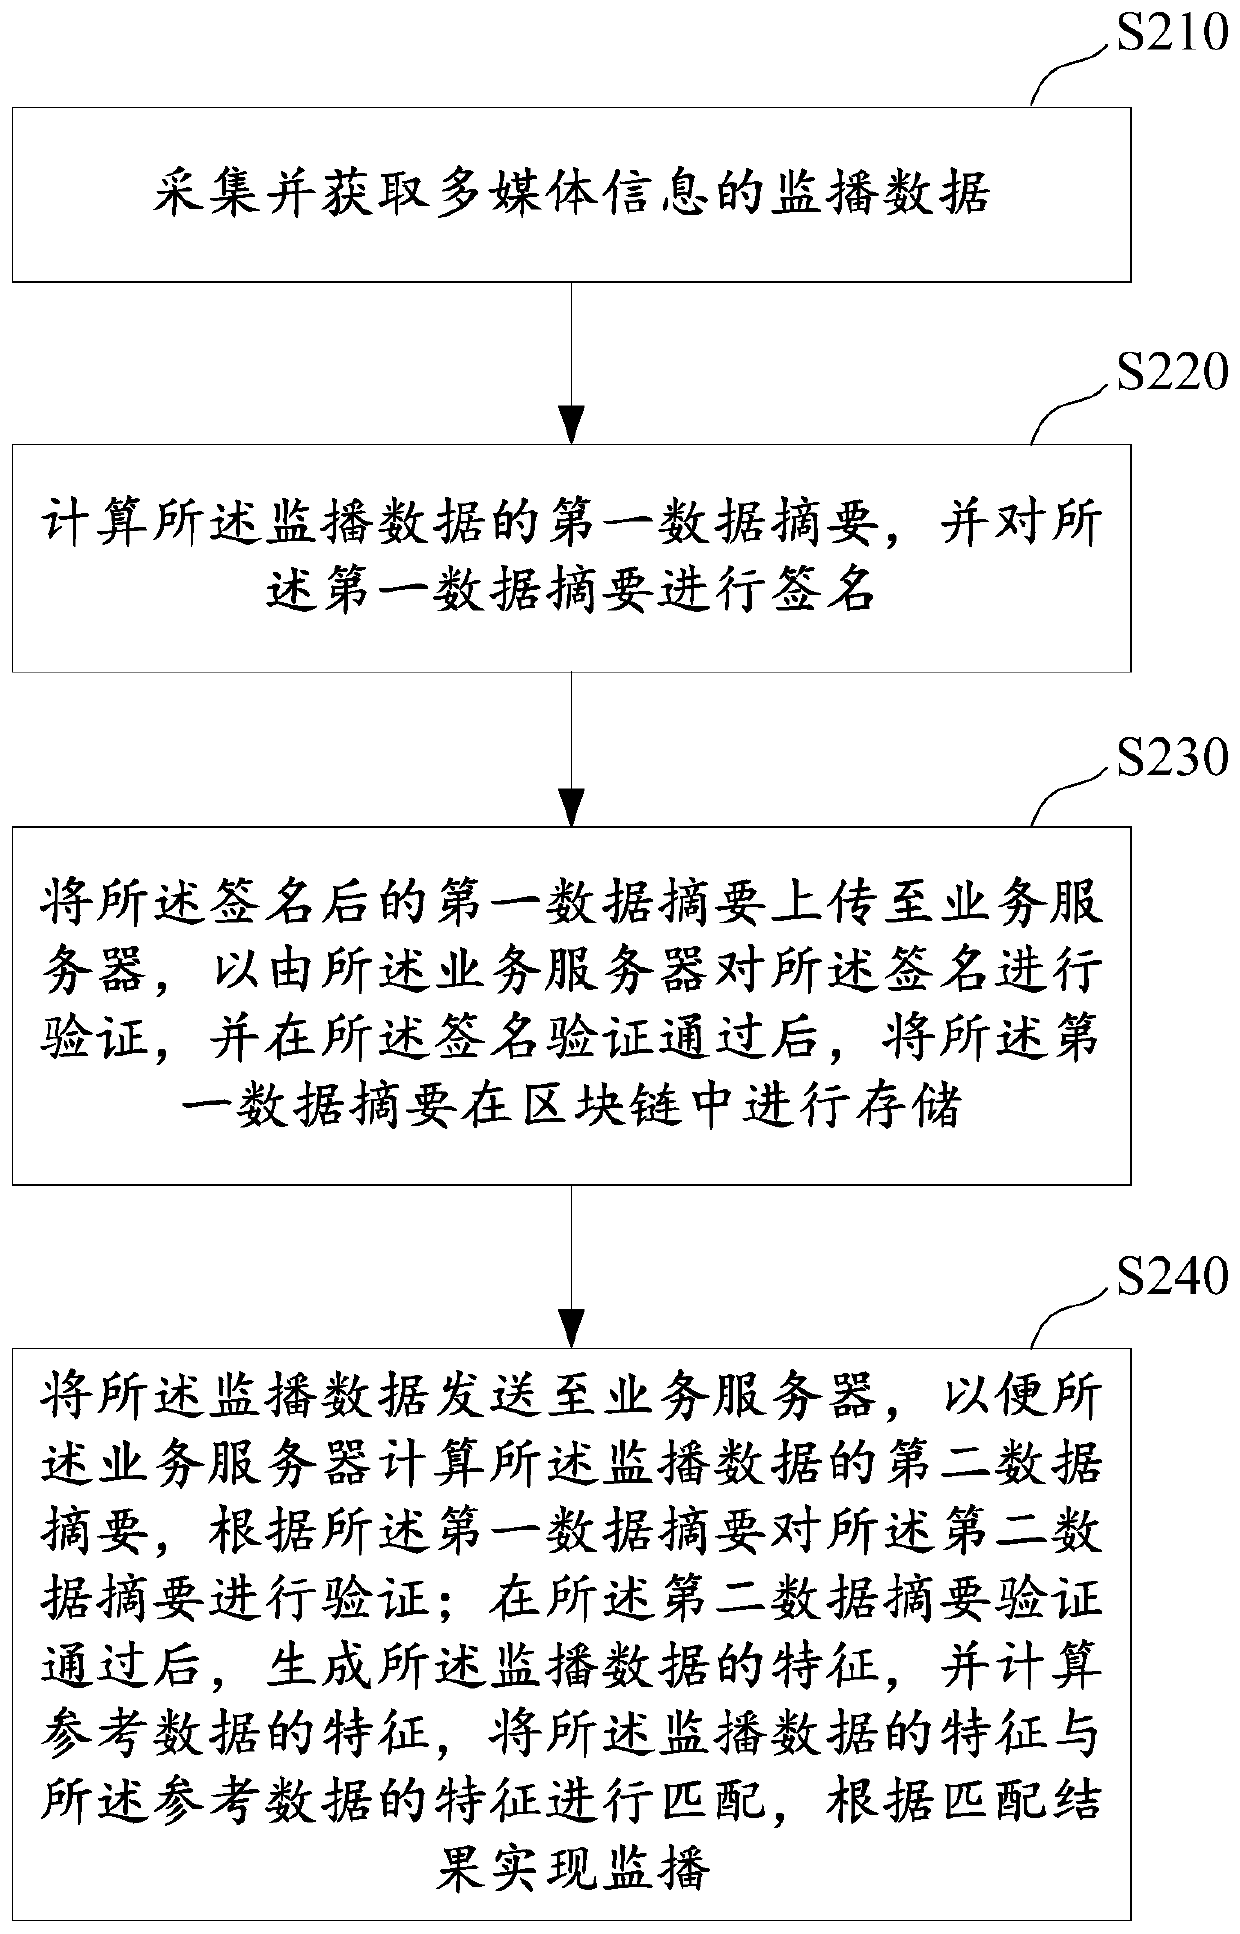 Block chain-based multimedia information monitoring broadcast method, device and system